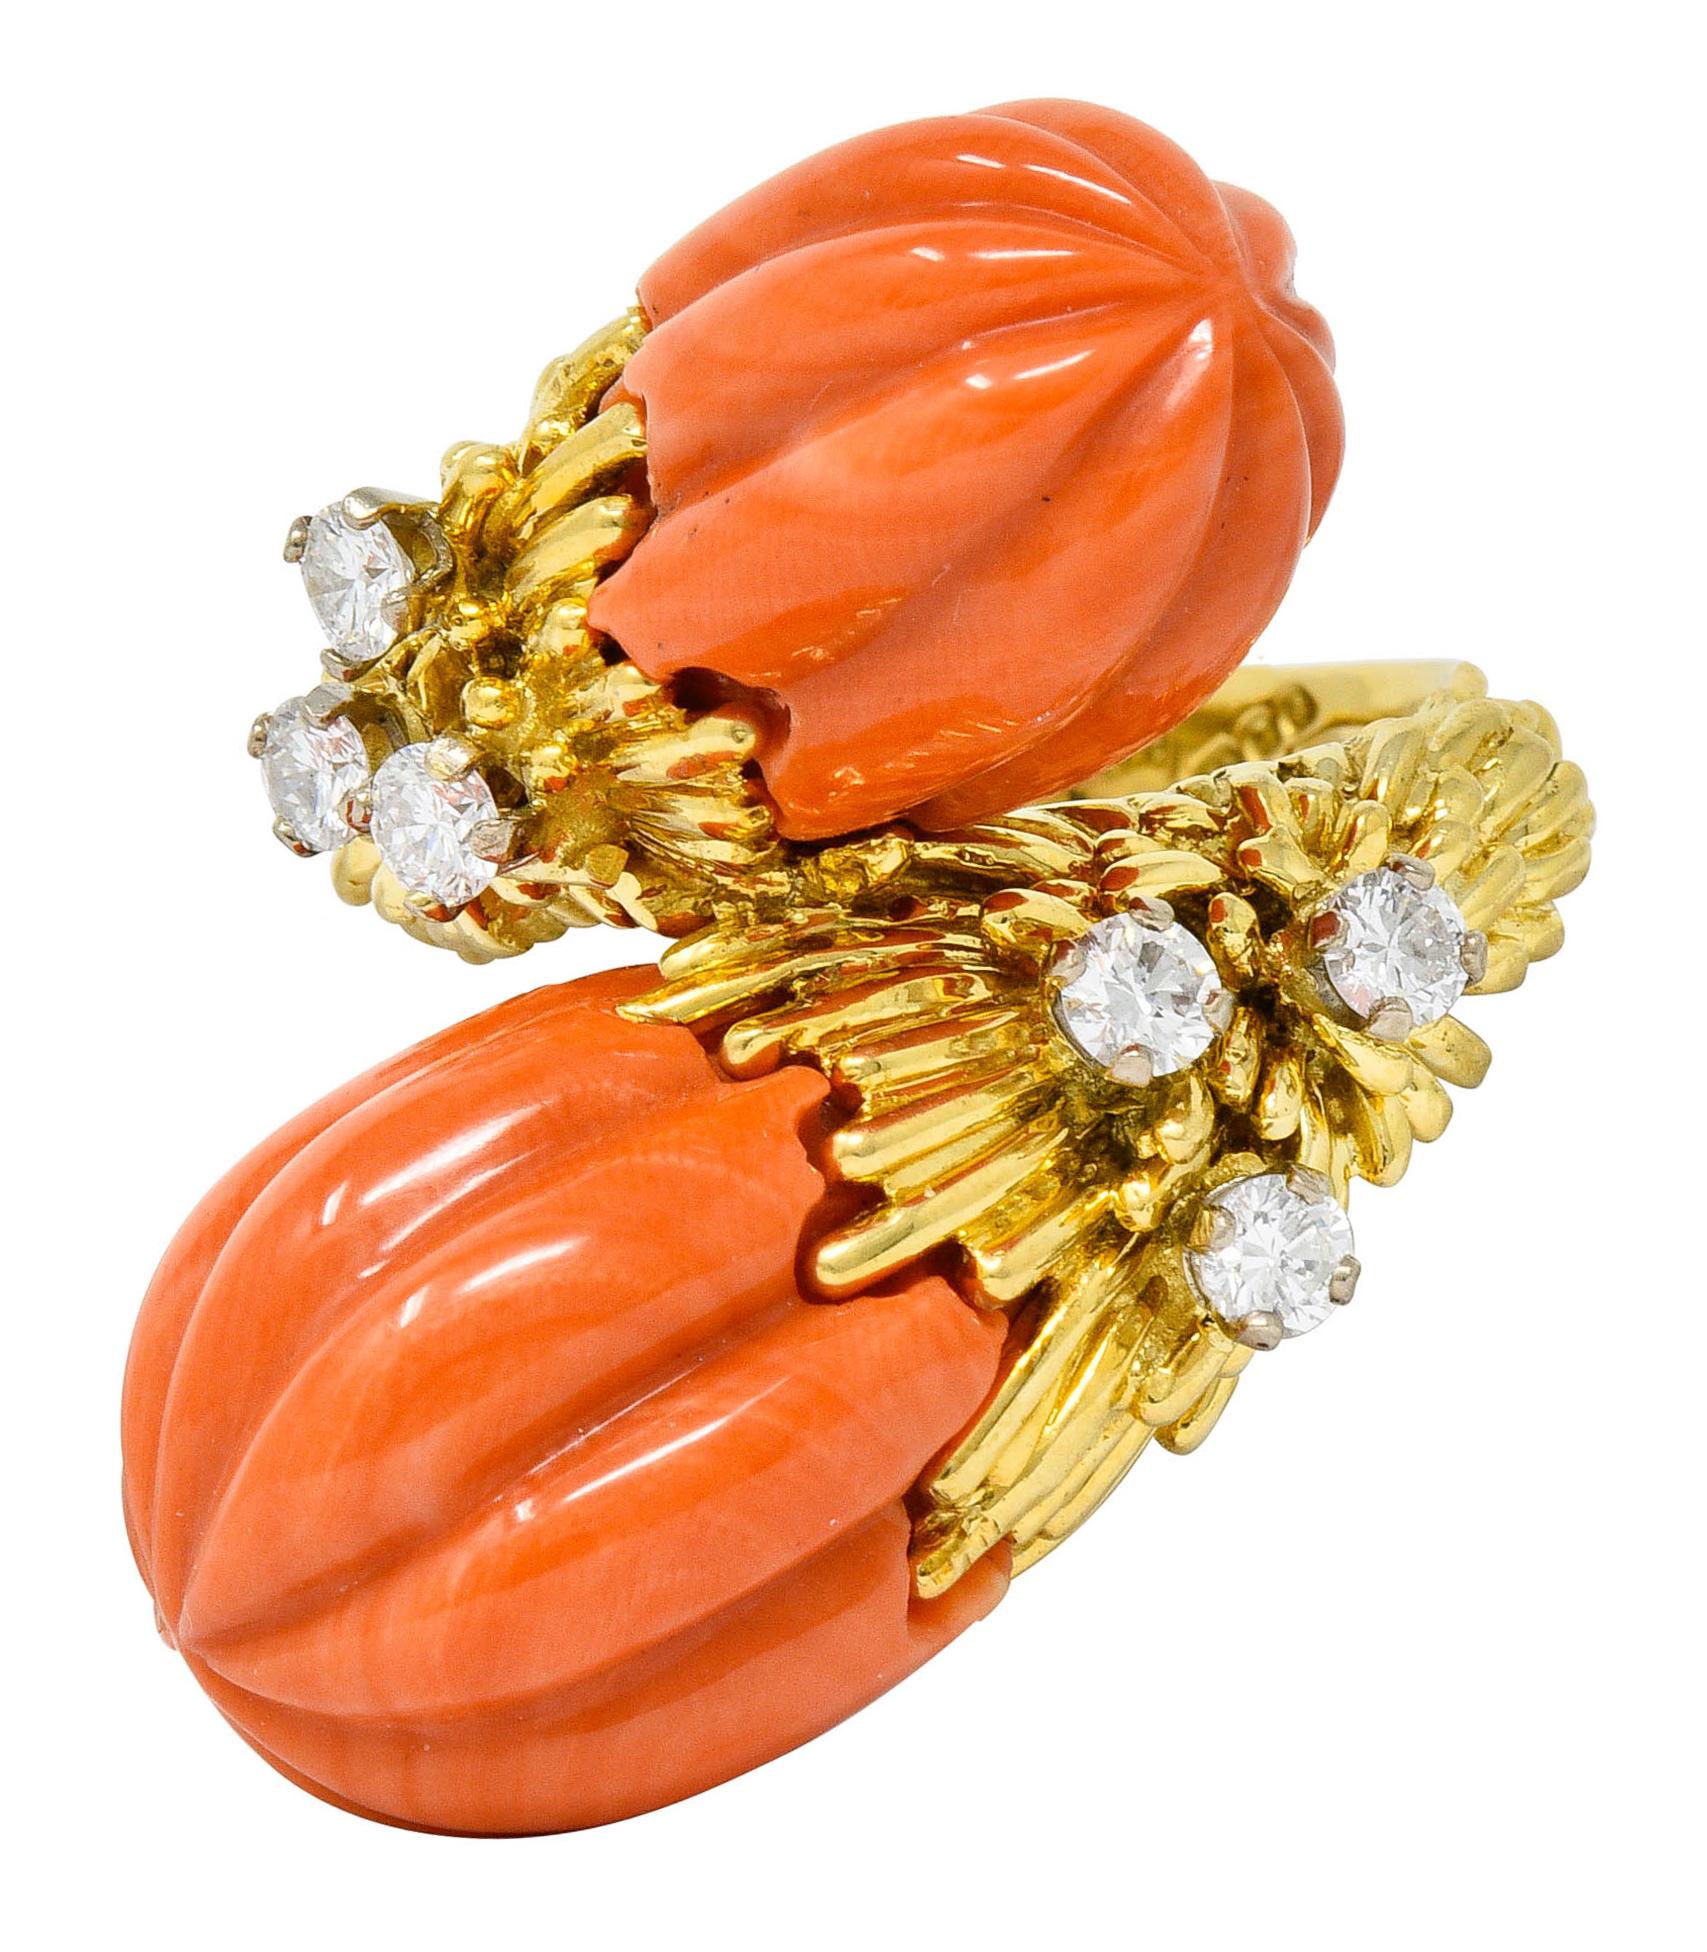 Bypass style ring terminating as two pampel shaped coral with deeply carved fluting

Well-matched with peachy-orange color and exhibits very slight swirled color distribution

Accented by round brilliant cut diamonds weighing approximately 0.60